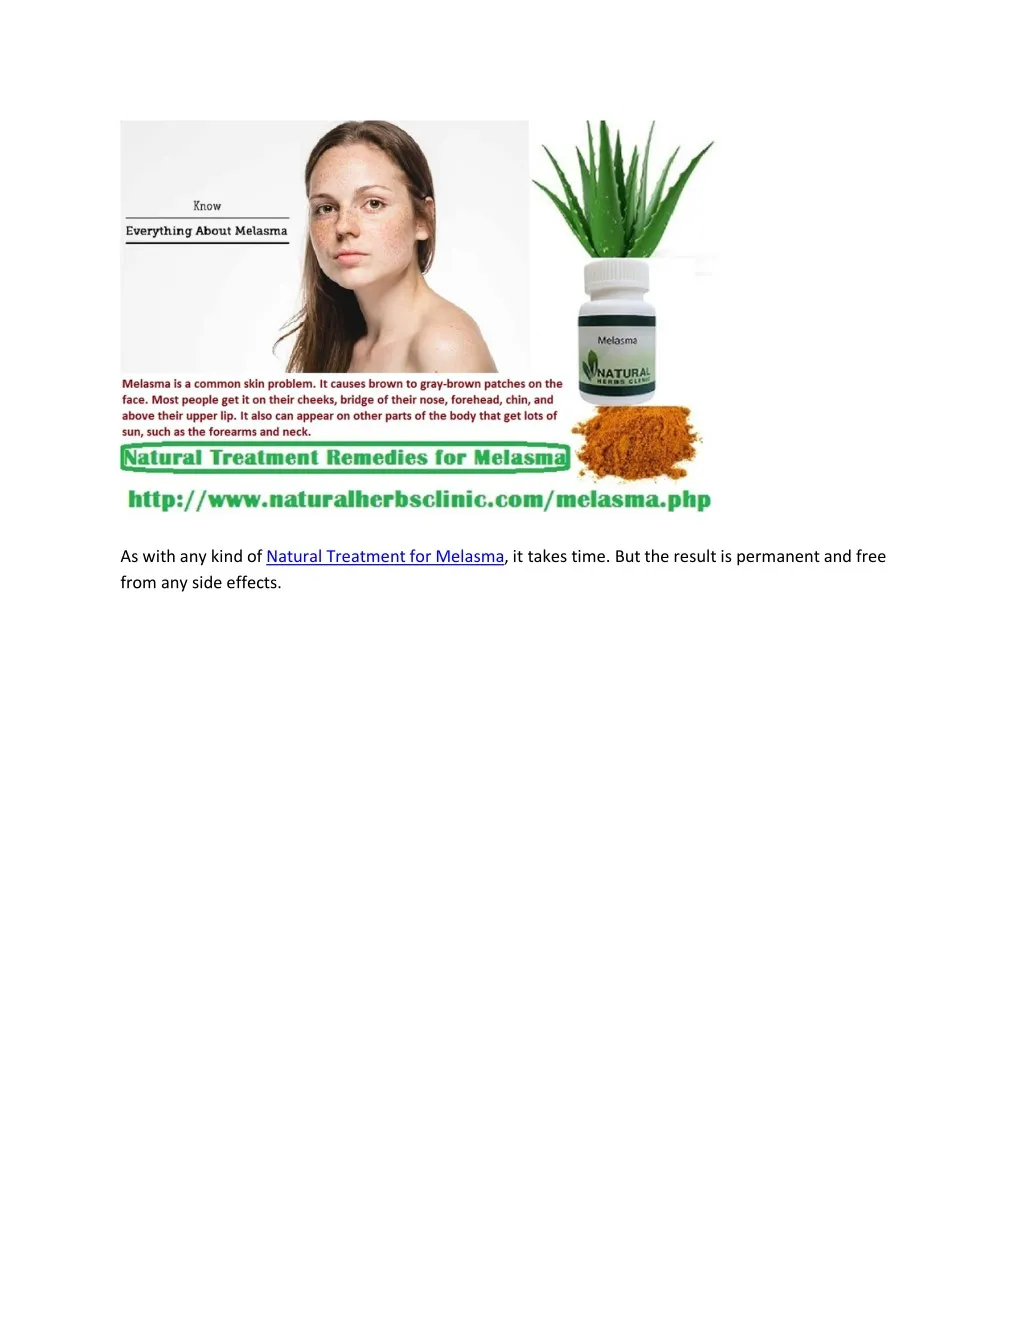 as with any kind of natural treatment for melasma